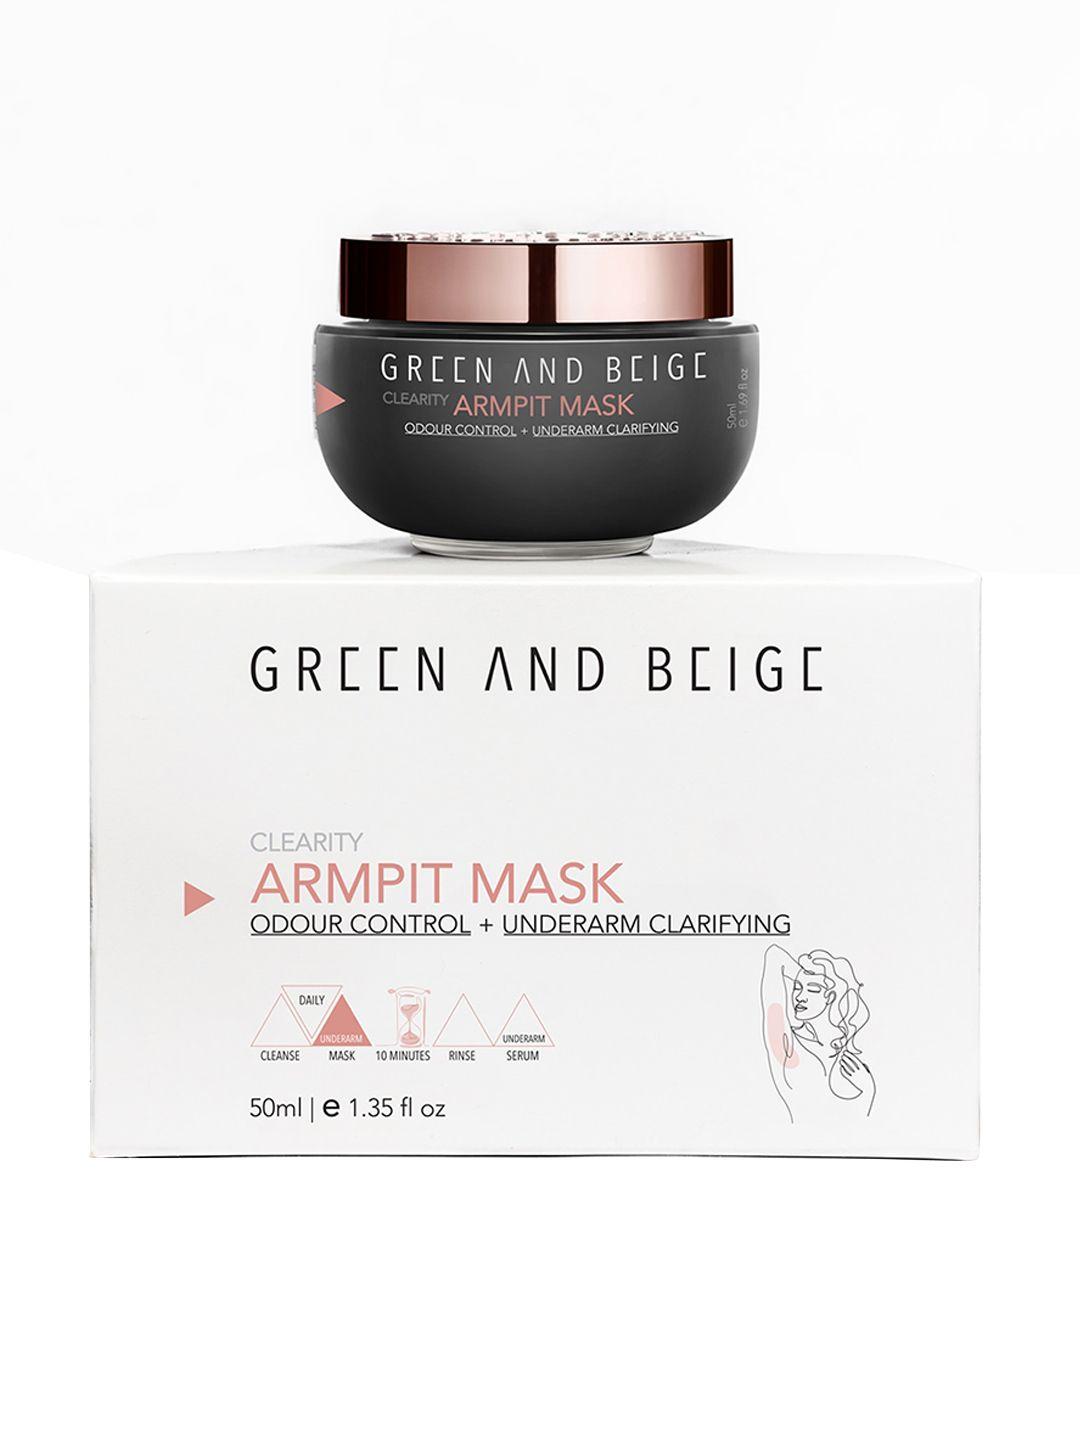 green and beige clearity armpit mask for clarifying underarms & odour control - 50ml